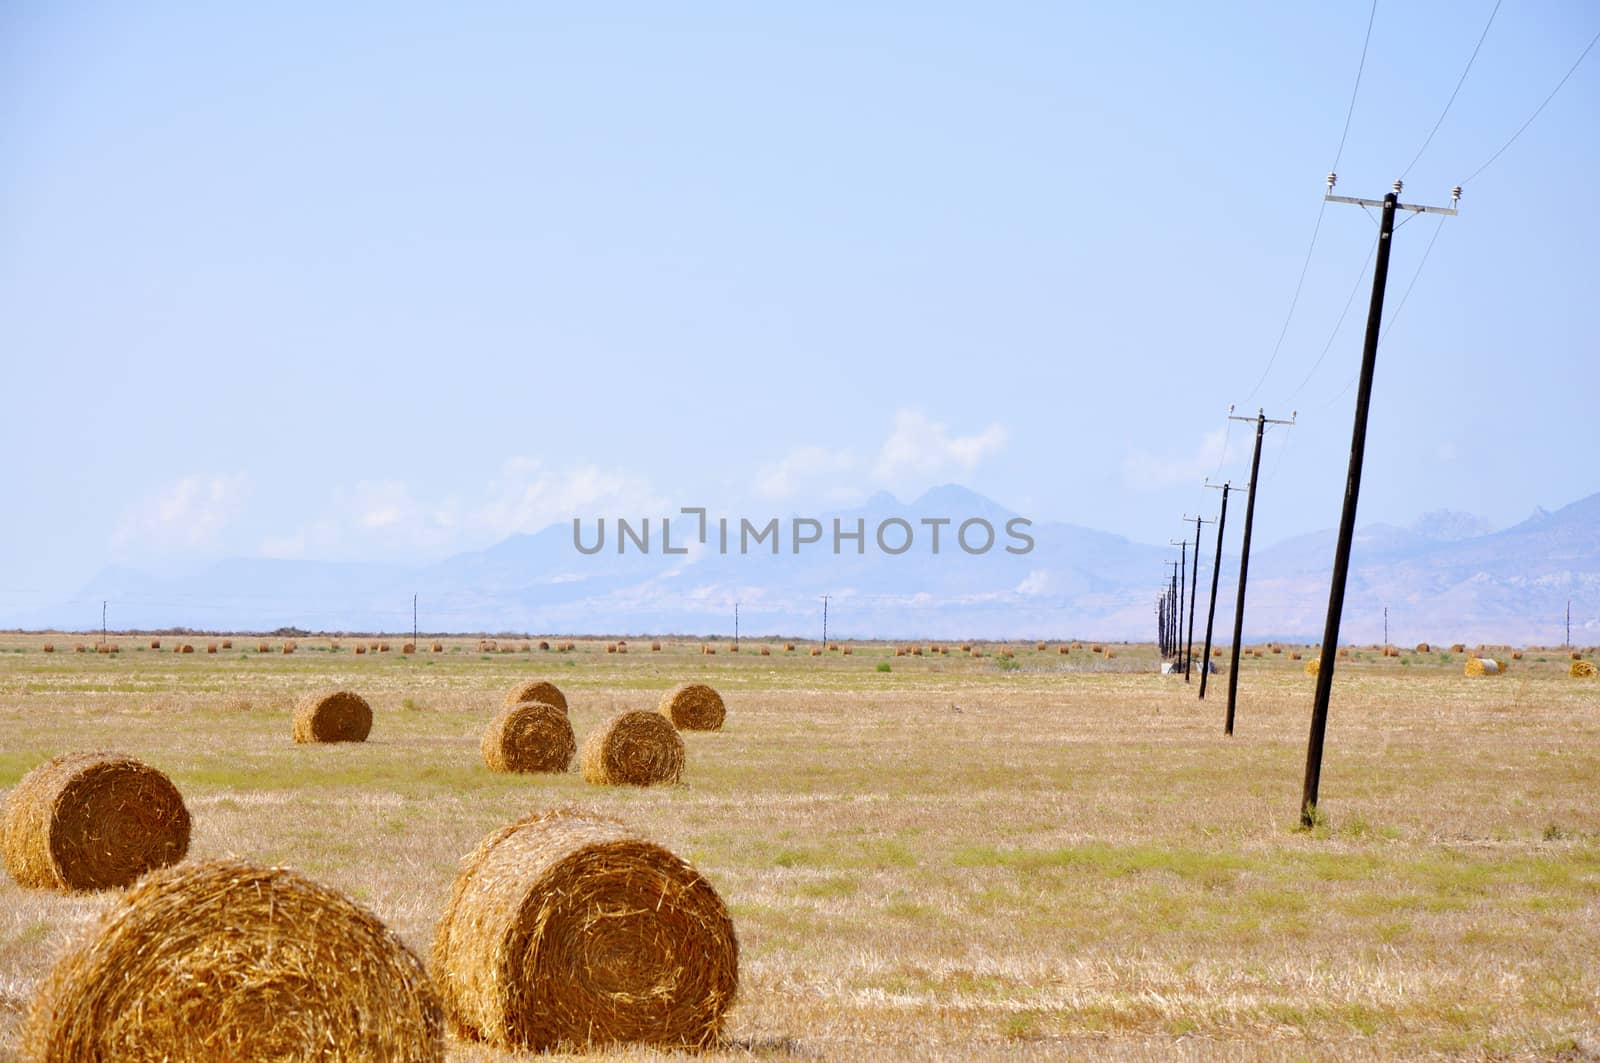 Hay bales on the field after harvest, in the middle of Cyprus